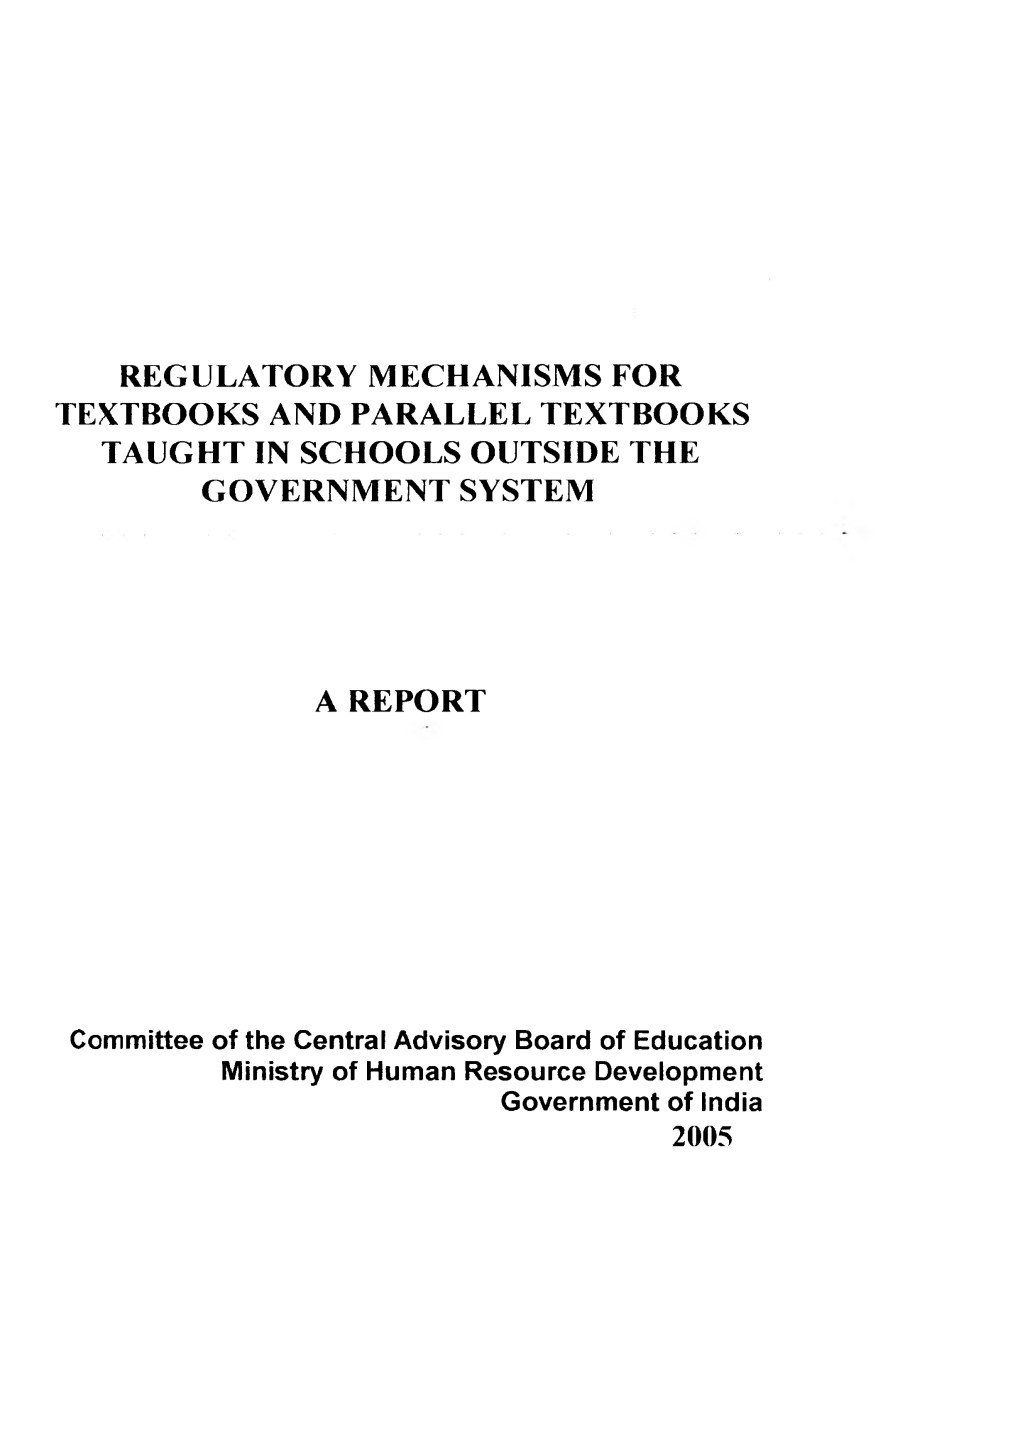 Regulatory Mechanisms for Textbooks and Parallel Textbooks Taught in Schools Outside the Government System